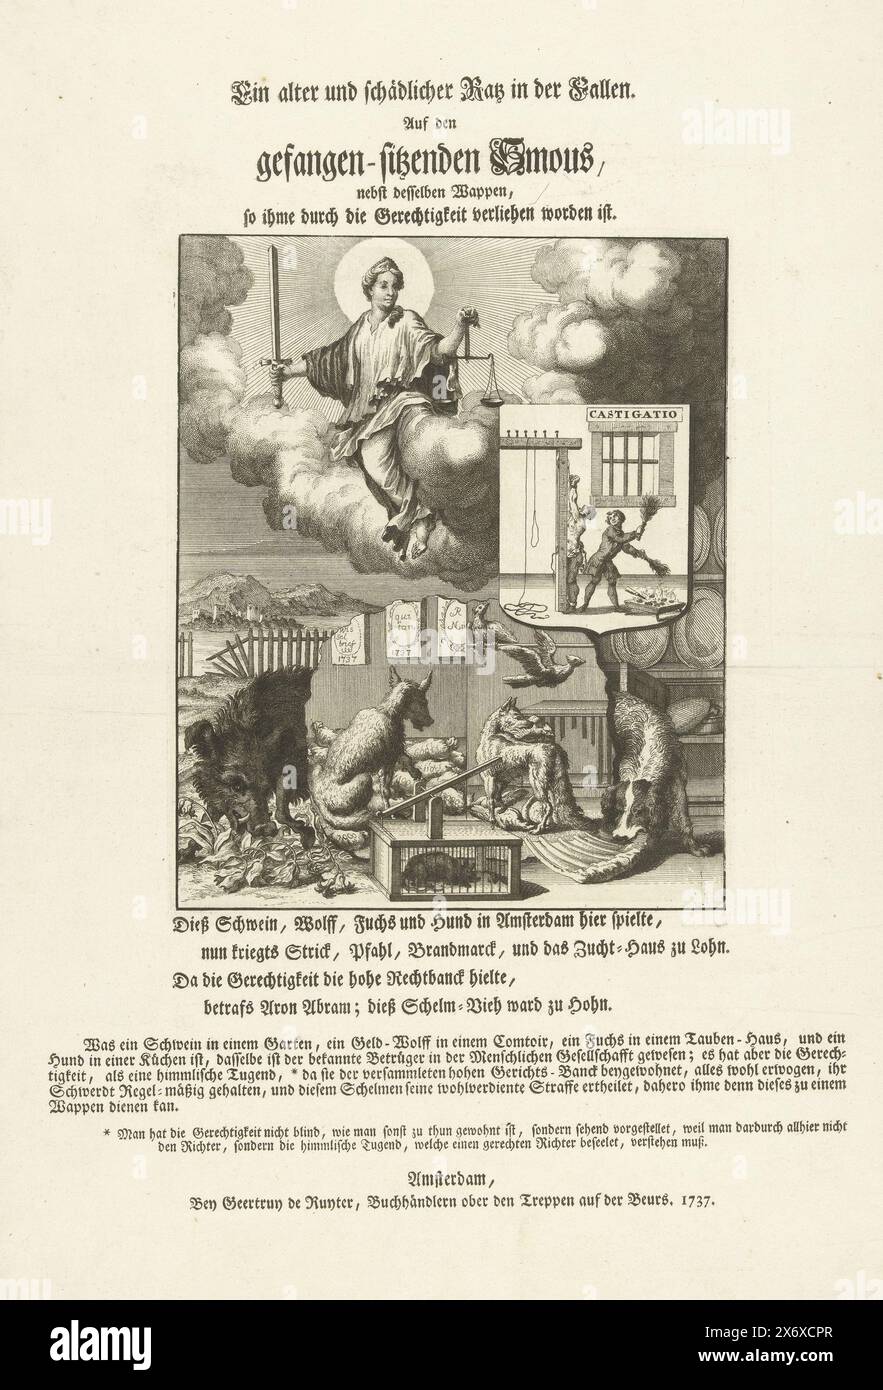 Allegory on the trial of the Jew Aron Abrams, 1737, Ein alter und schädlicher Ratz in der Fallen. After the inmates sitzenden Smous, nebst desselben Wappen, so ihme durch die Gerechtigkeit verliehen zijnt (title on object), The Amsterdam Jewish impostor Aron Abrams or Abrahams is flogged and branded. In the clouds Justice with sword and scales but without blindfold. Among four animals that symbolize 'the bad Jew': a rooting boar, a wolf in a bank vault, a fox in a dovecote and a dog in the kitchen. The rat in the trap represents Abrahams himself who is now imprisoned. Below the image a verse Stock Photo